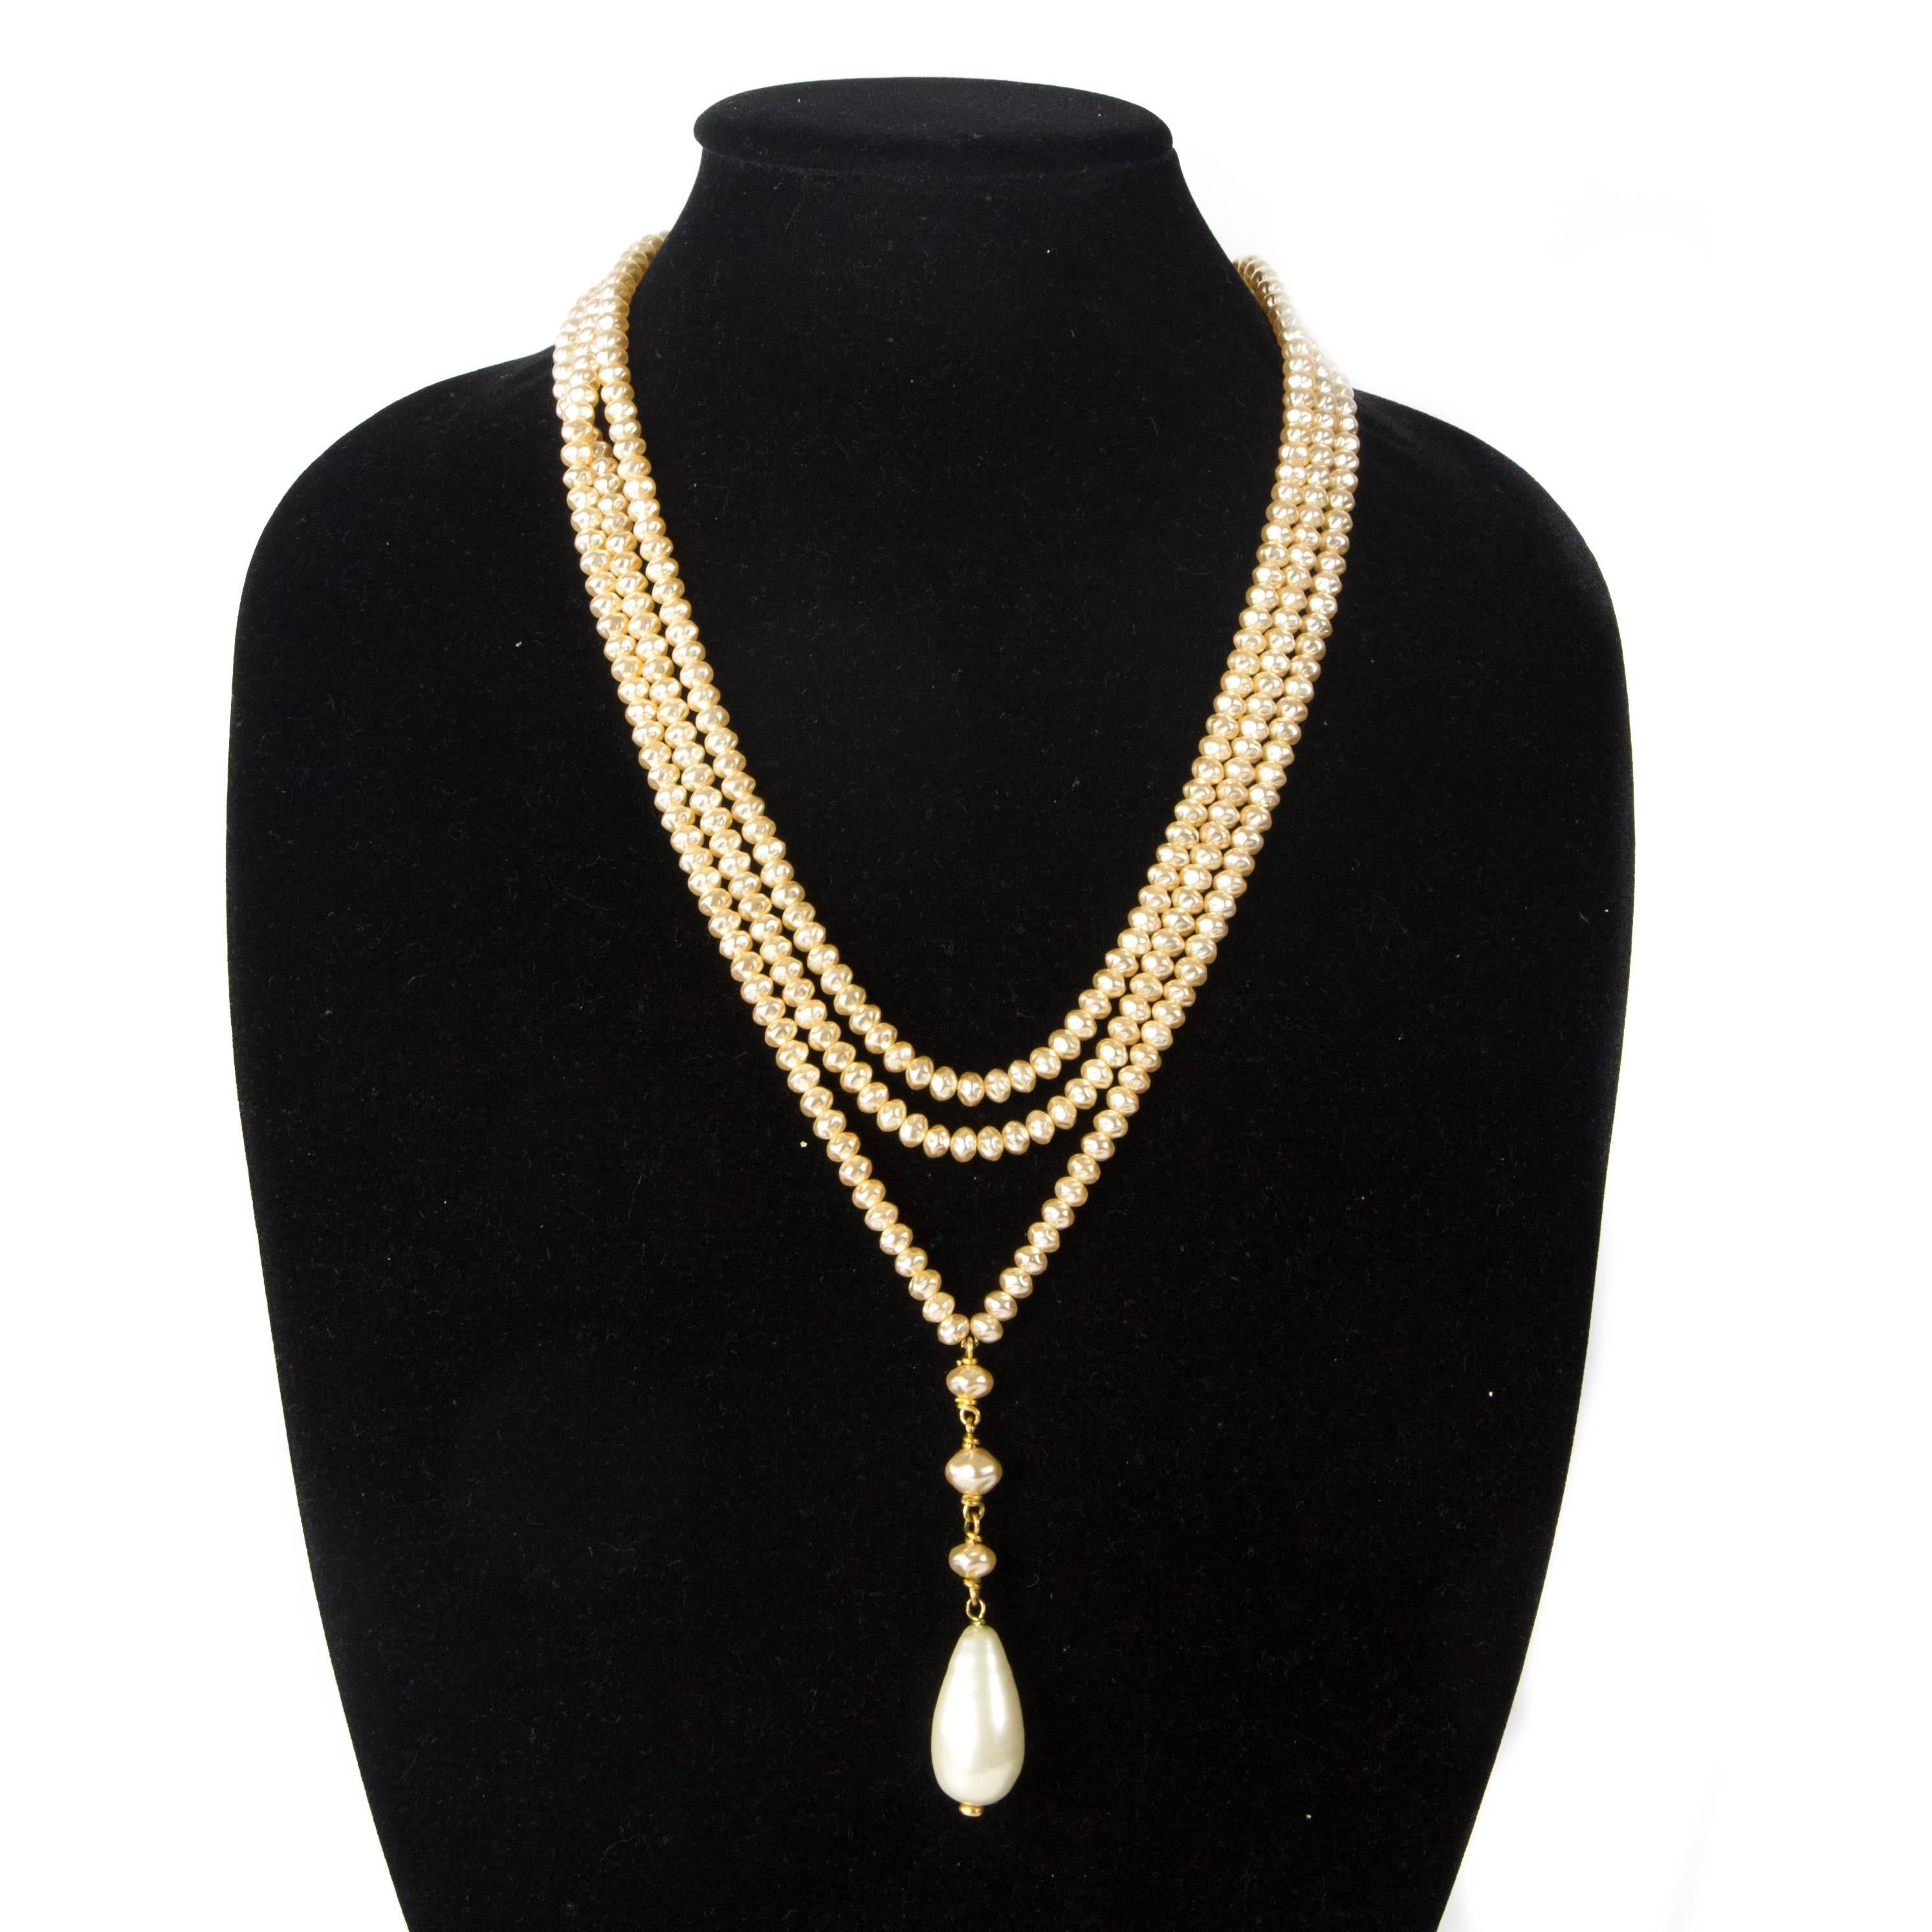 Chanel - Vintage  Pearl Drop Tassel Necklace

Color: Gold / White

Material: Pearl Beads

------------------------------------------------------------

Details:

- gold tone hardware

- teardrop pearl bead pendant

- stamped 94P - from